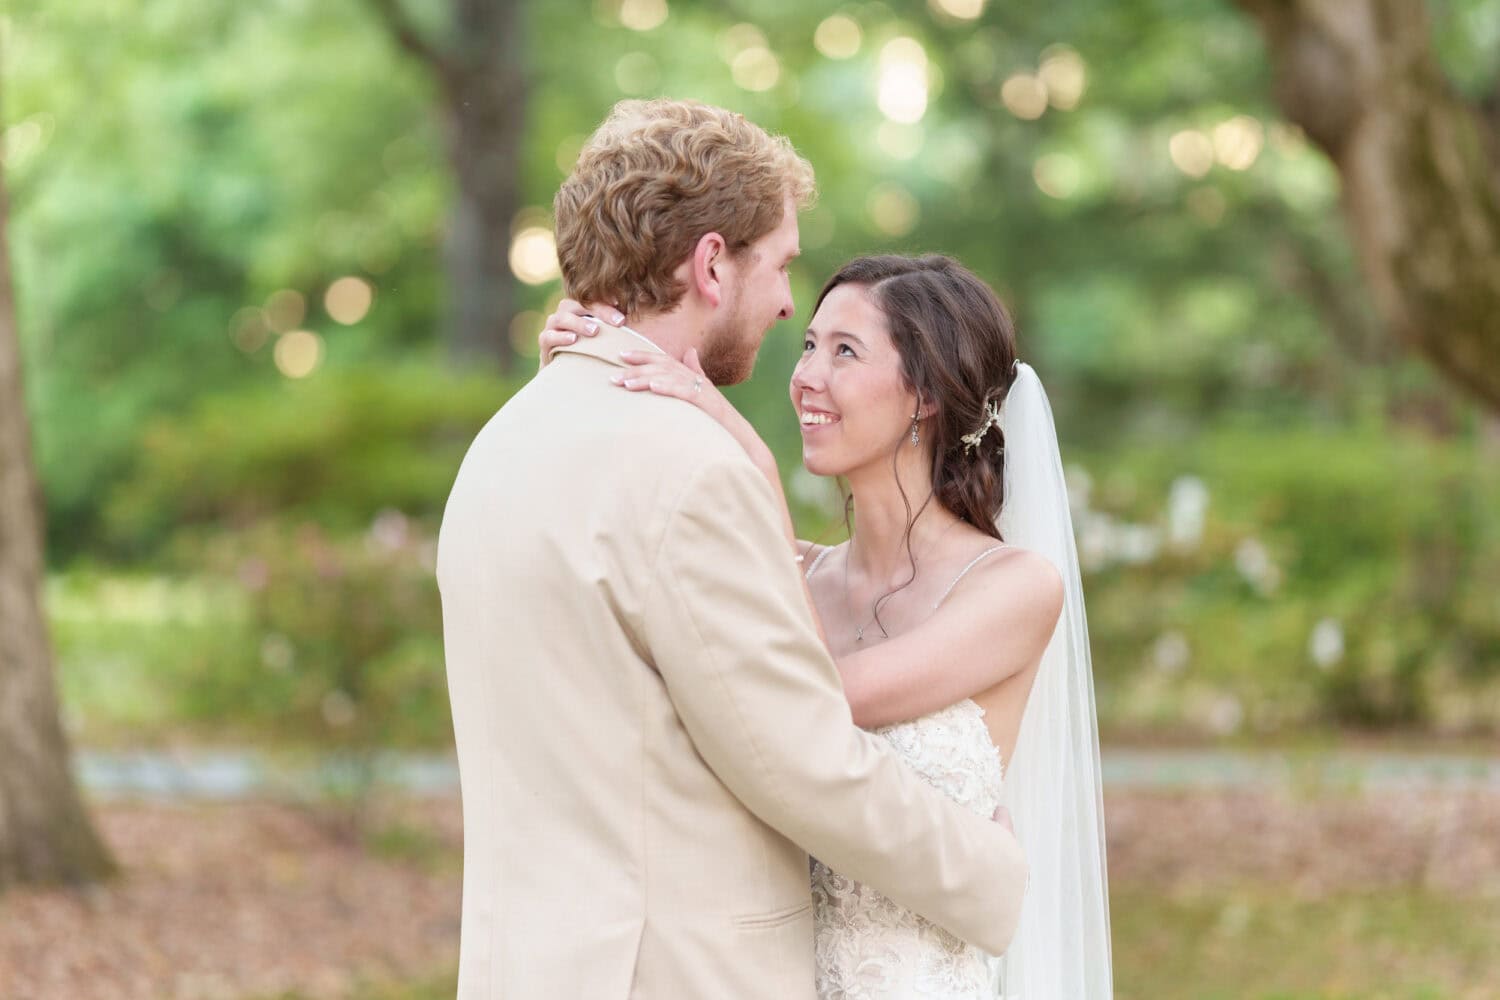 Big smile from the bride - Tanglewood Plantation